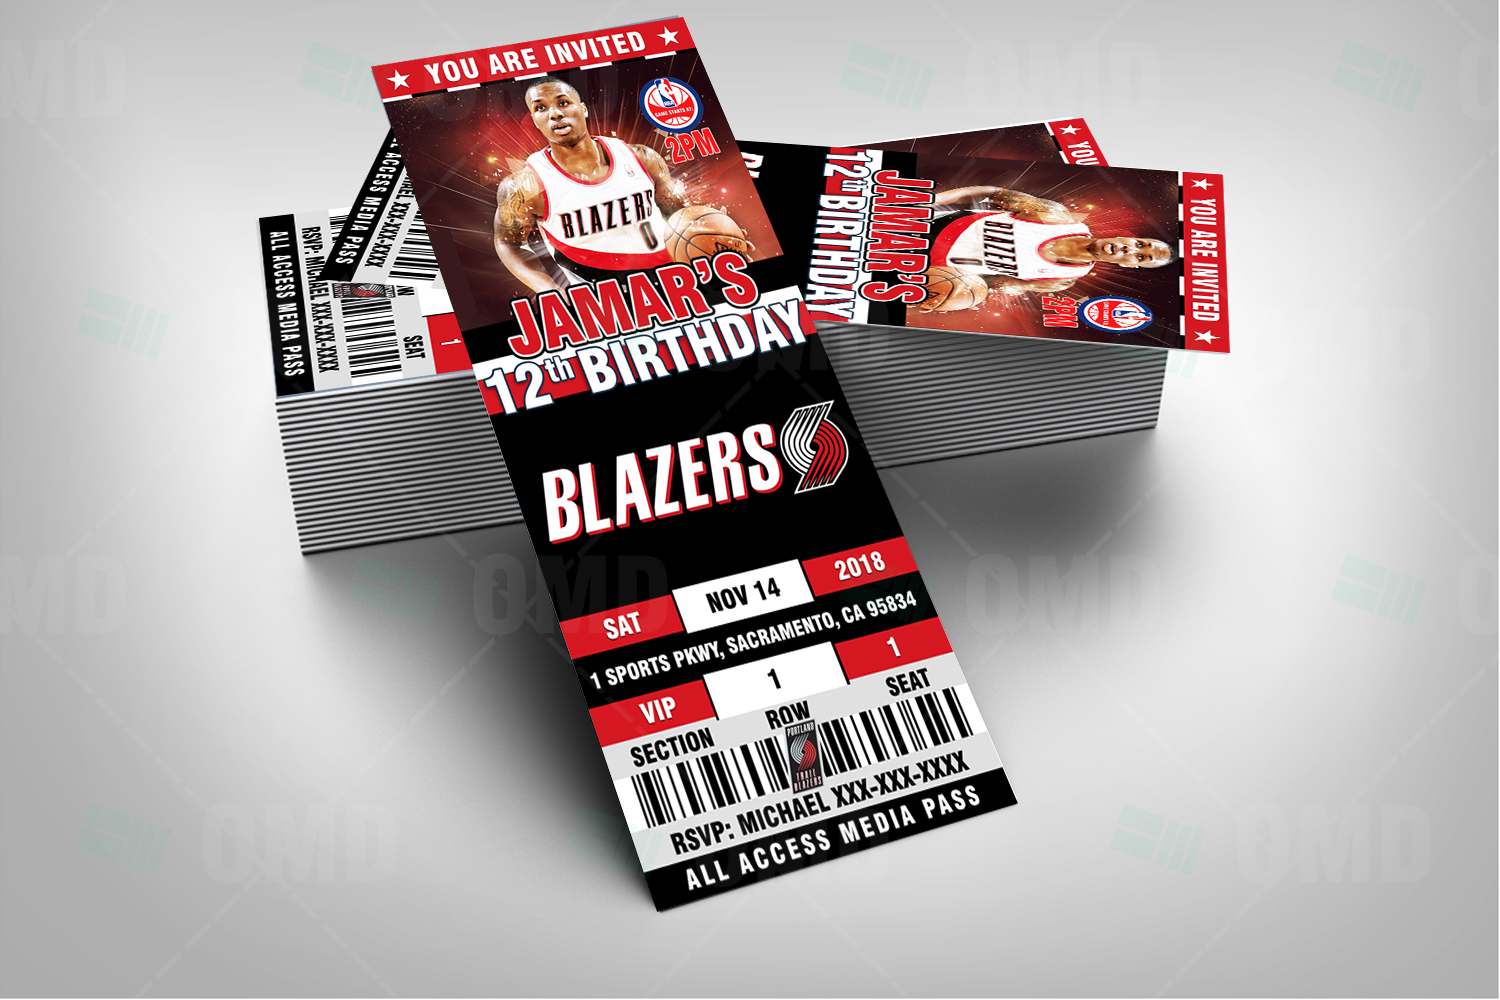 Trail Blazers Tickets, No Hidden Fees & Best Prices Guaranteed